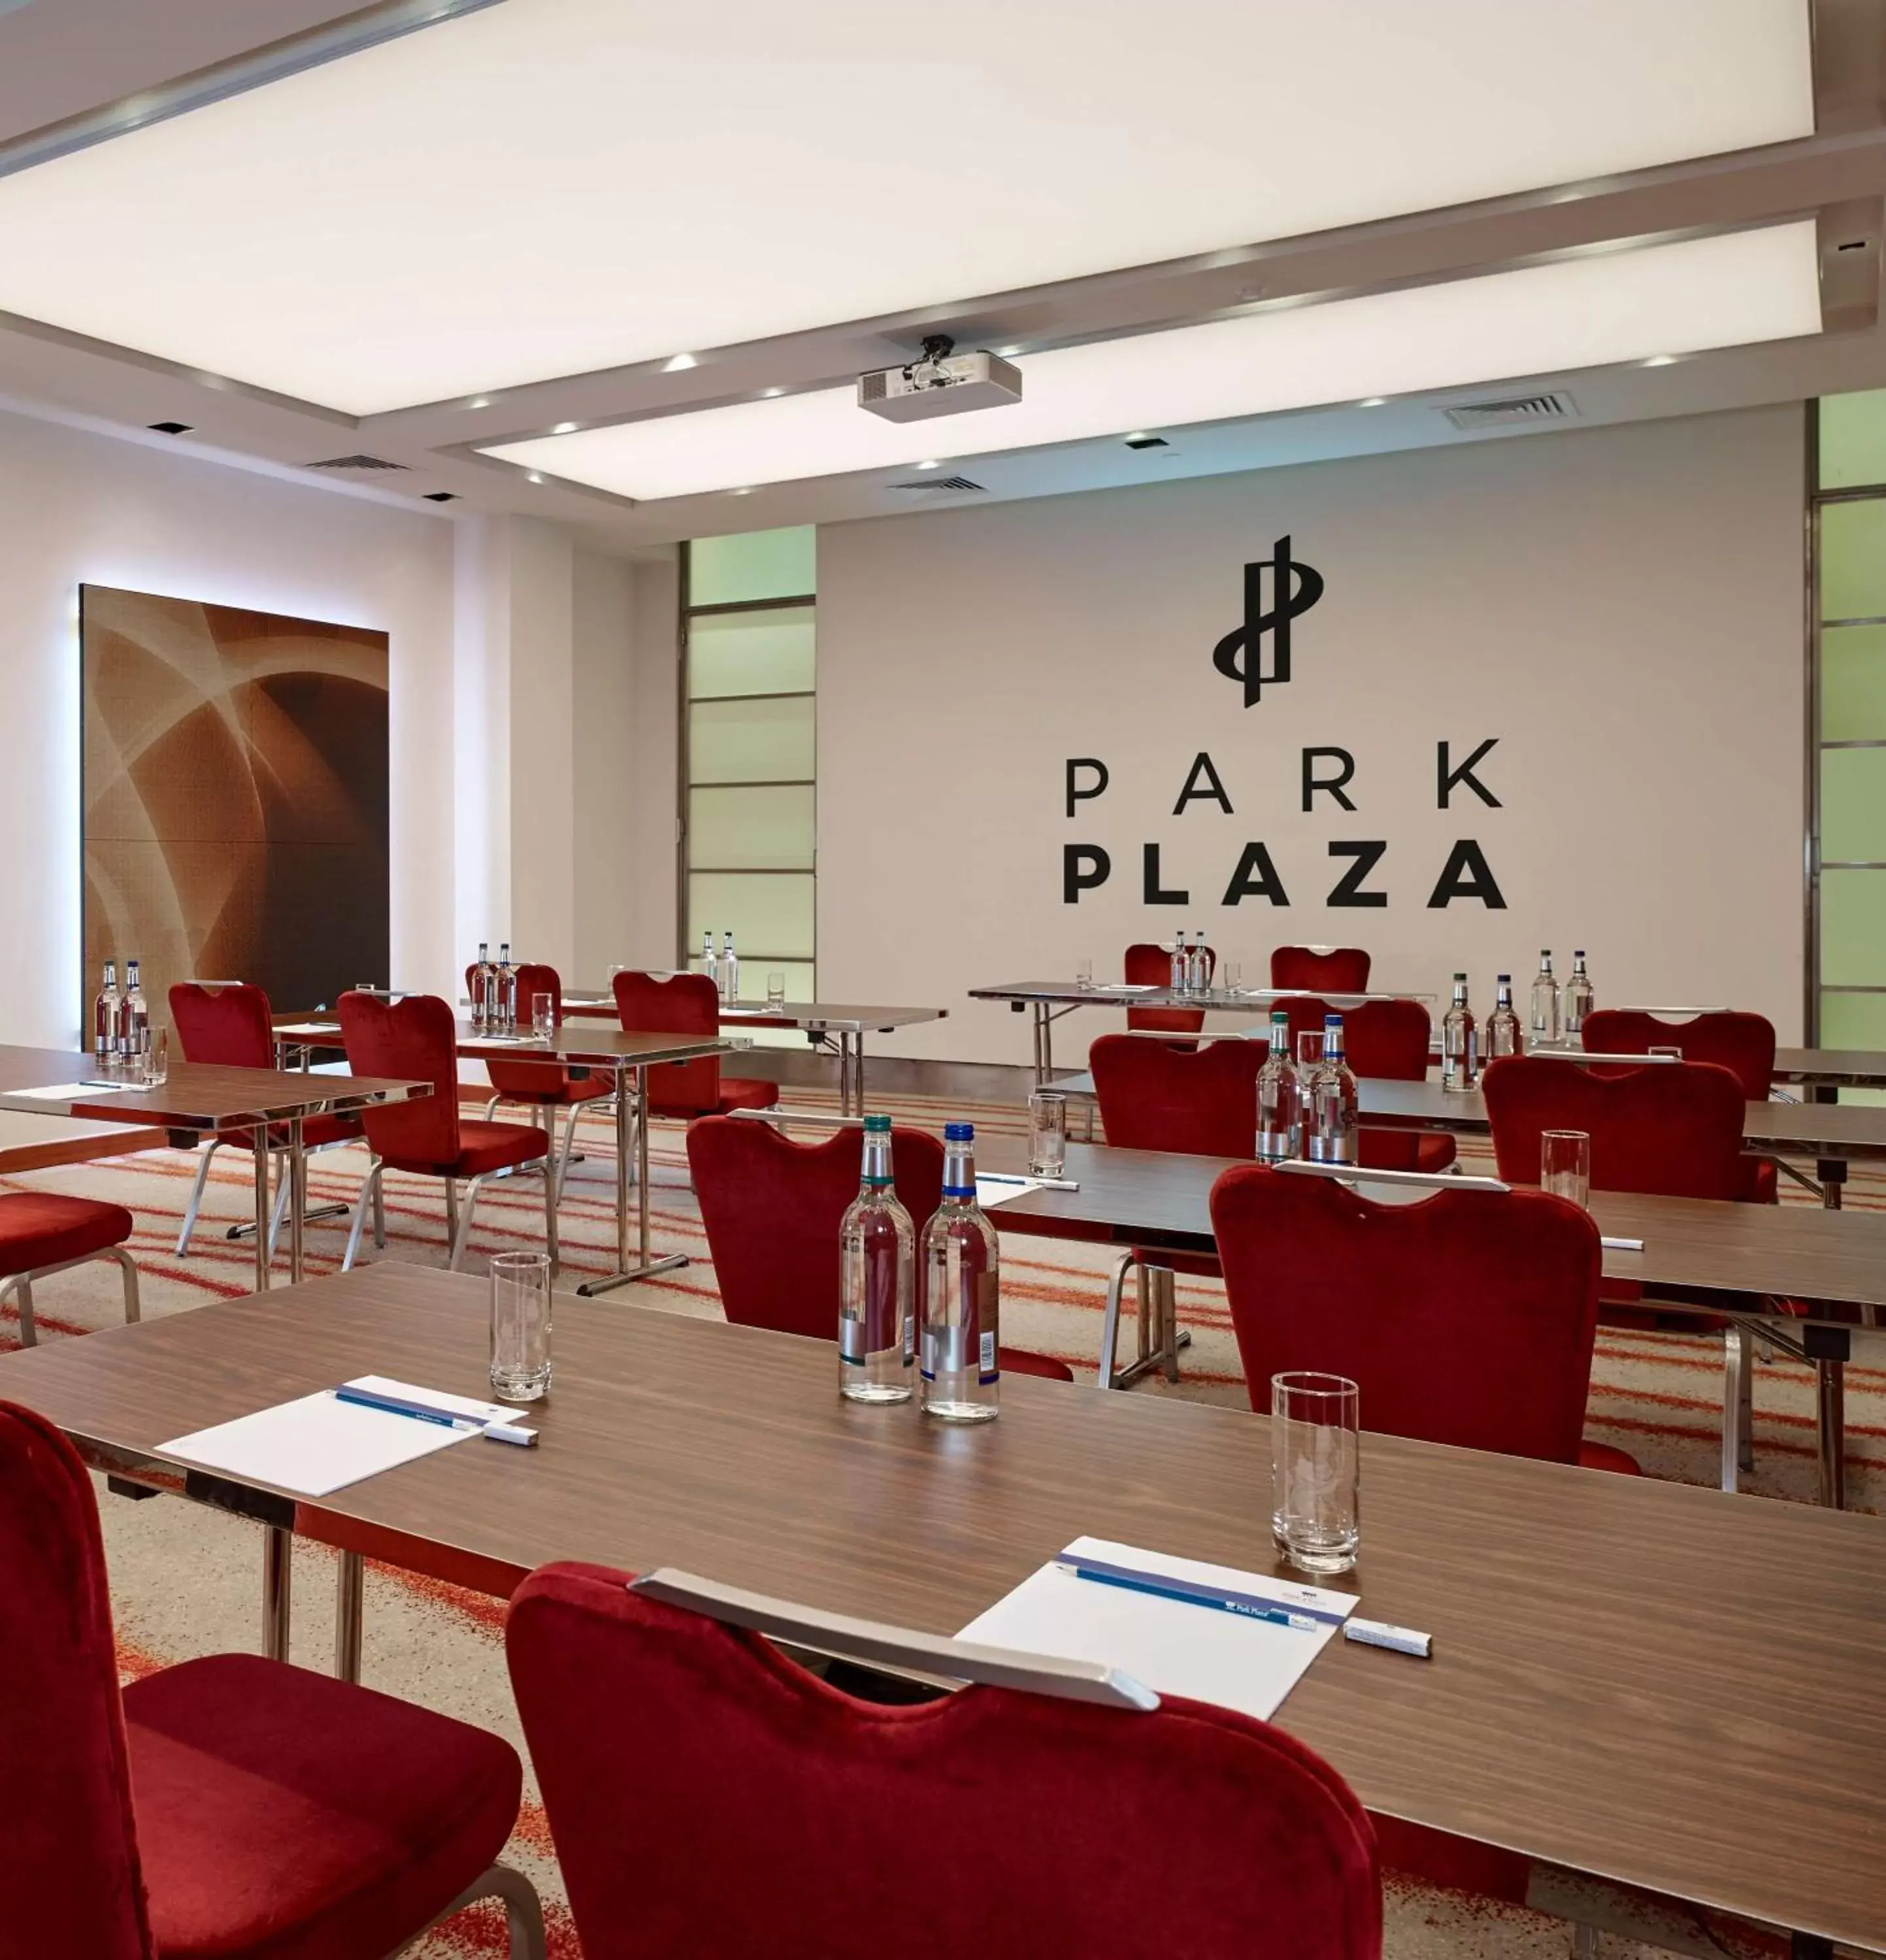 Meeting/conference room, Business Area/Conference Room in Park Plaza Victoria London